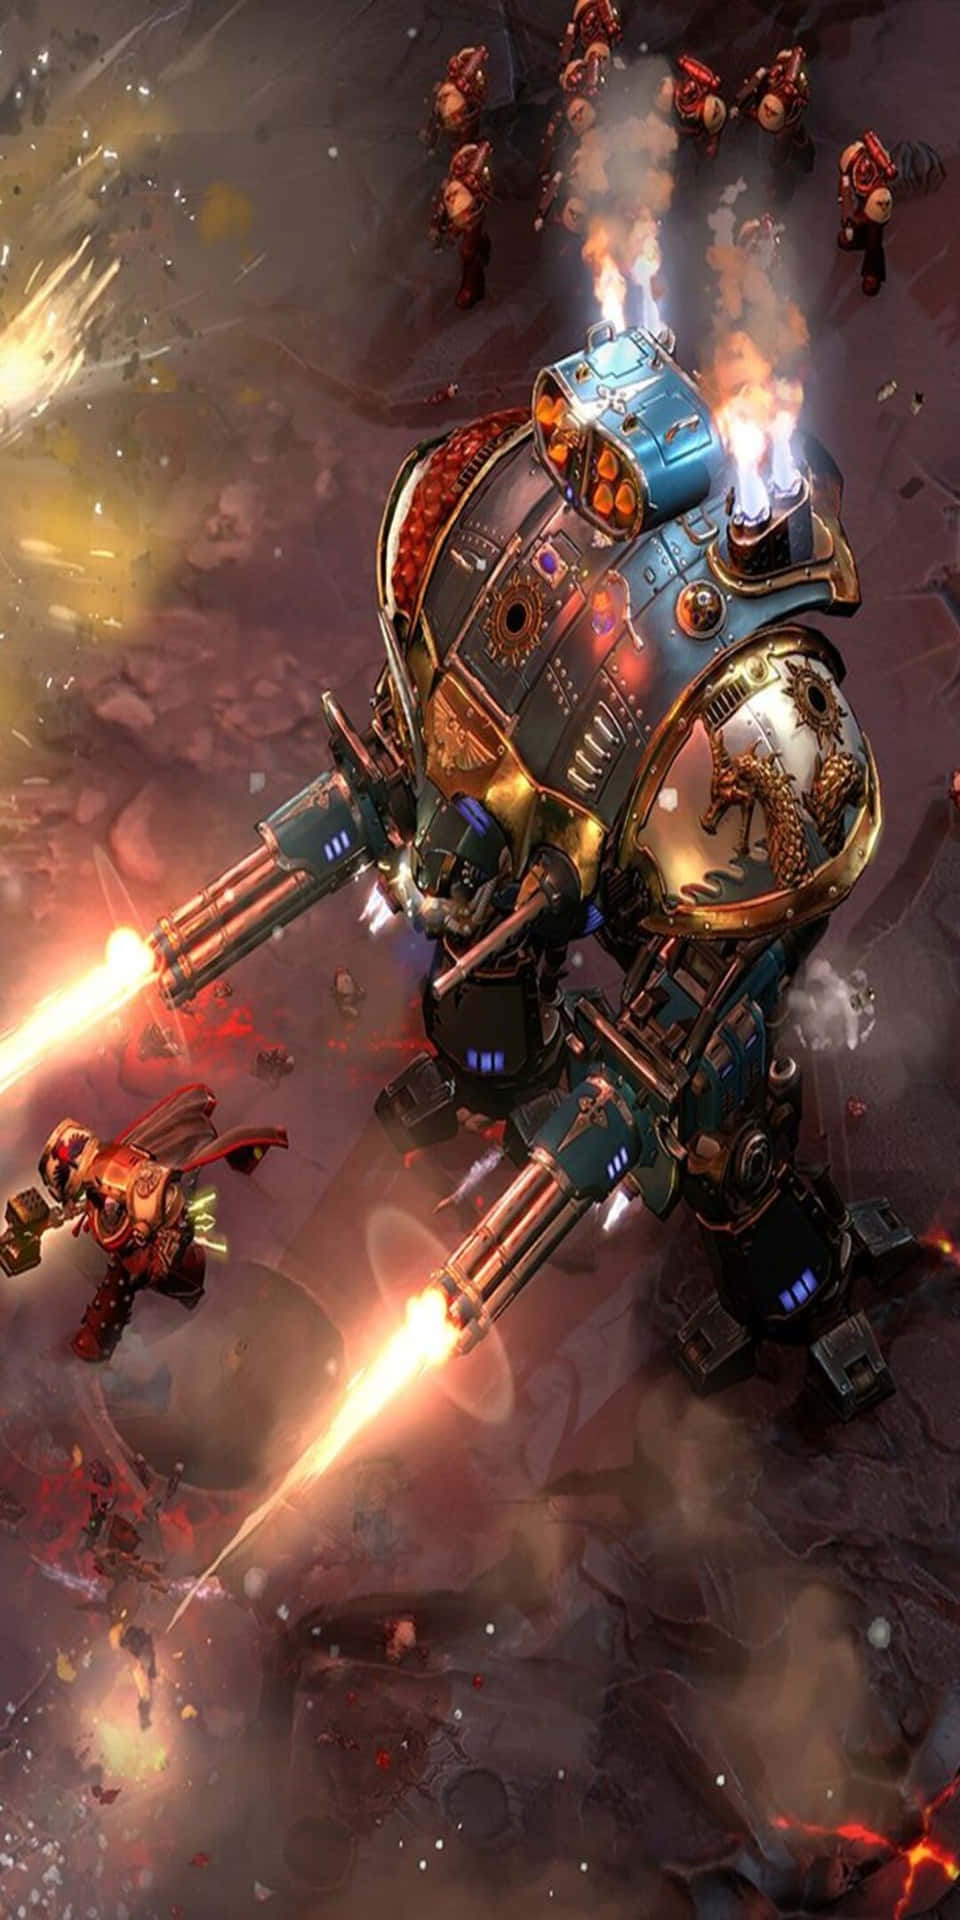 Experience a whole new level of gaming with Pixel 3 Dawn of War III